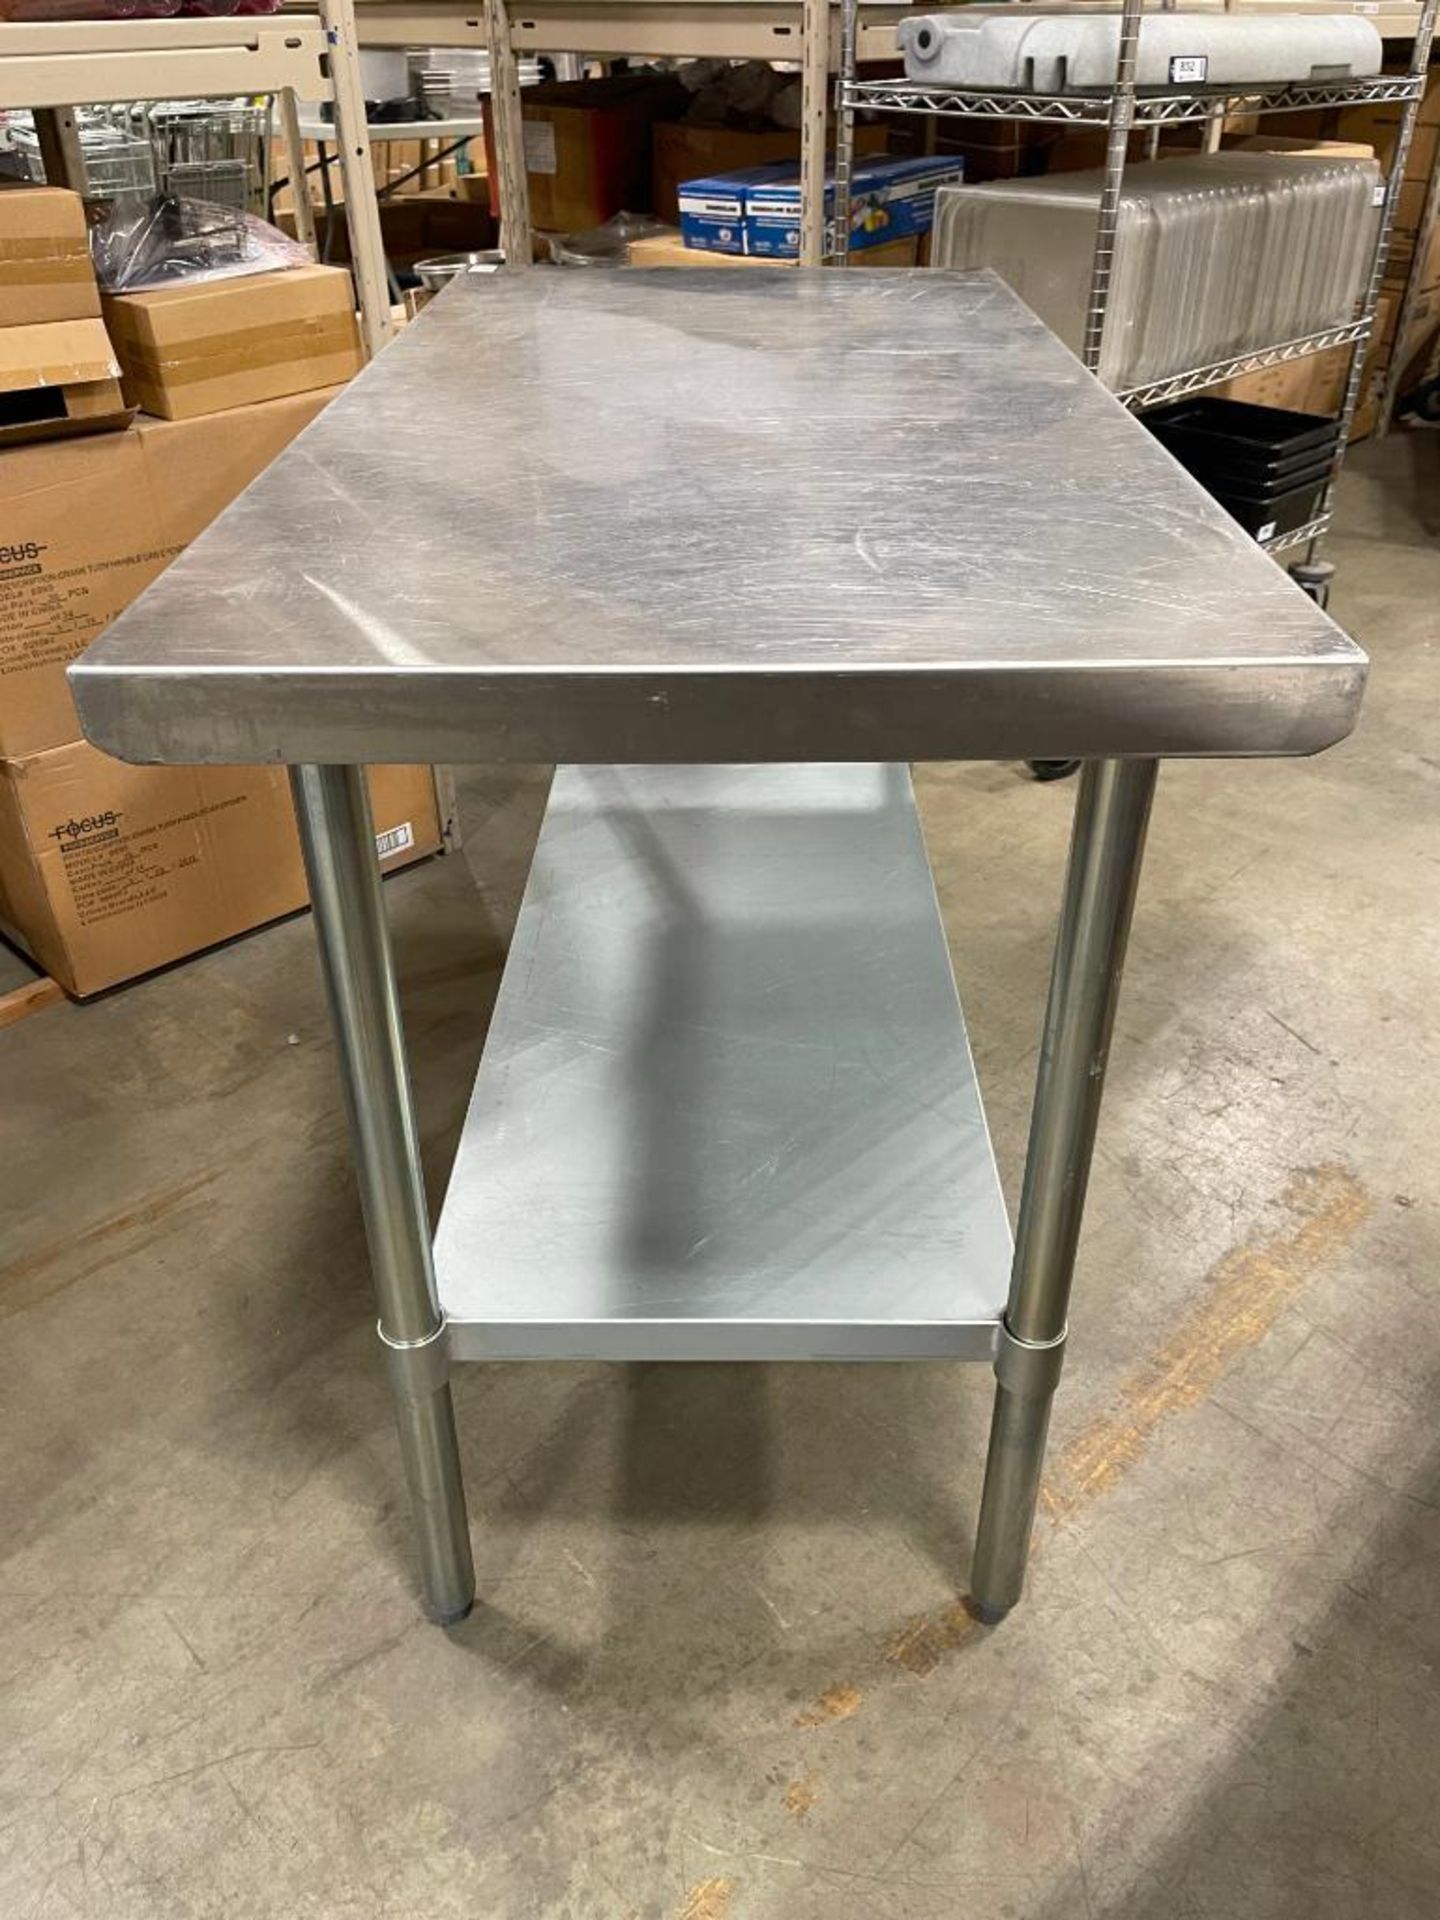 48" X 24" STAINLESS STEEL WORK TABLE - Image 5 of 5